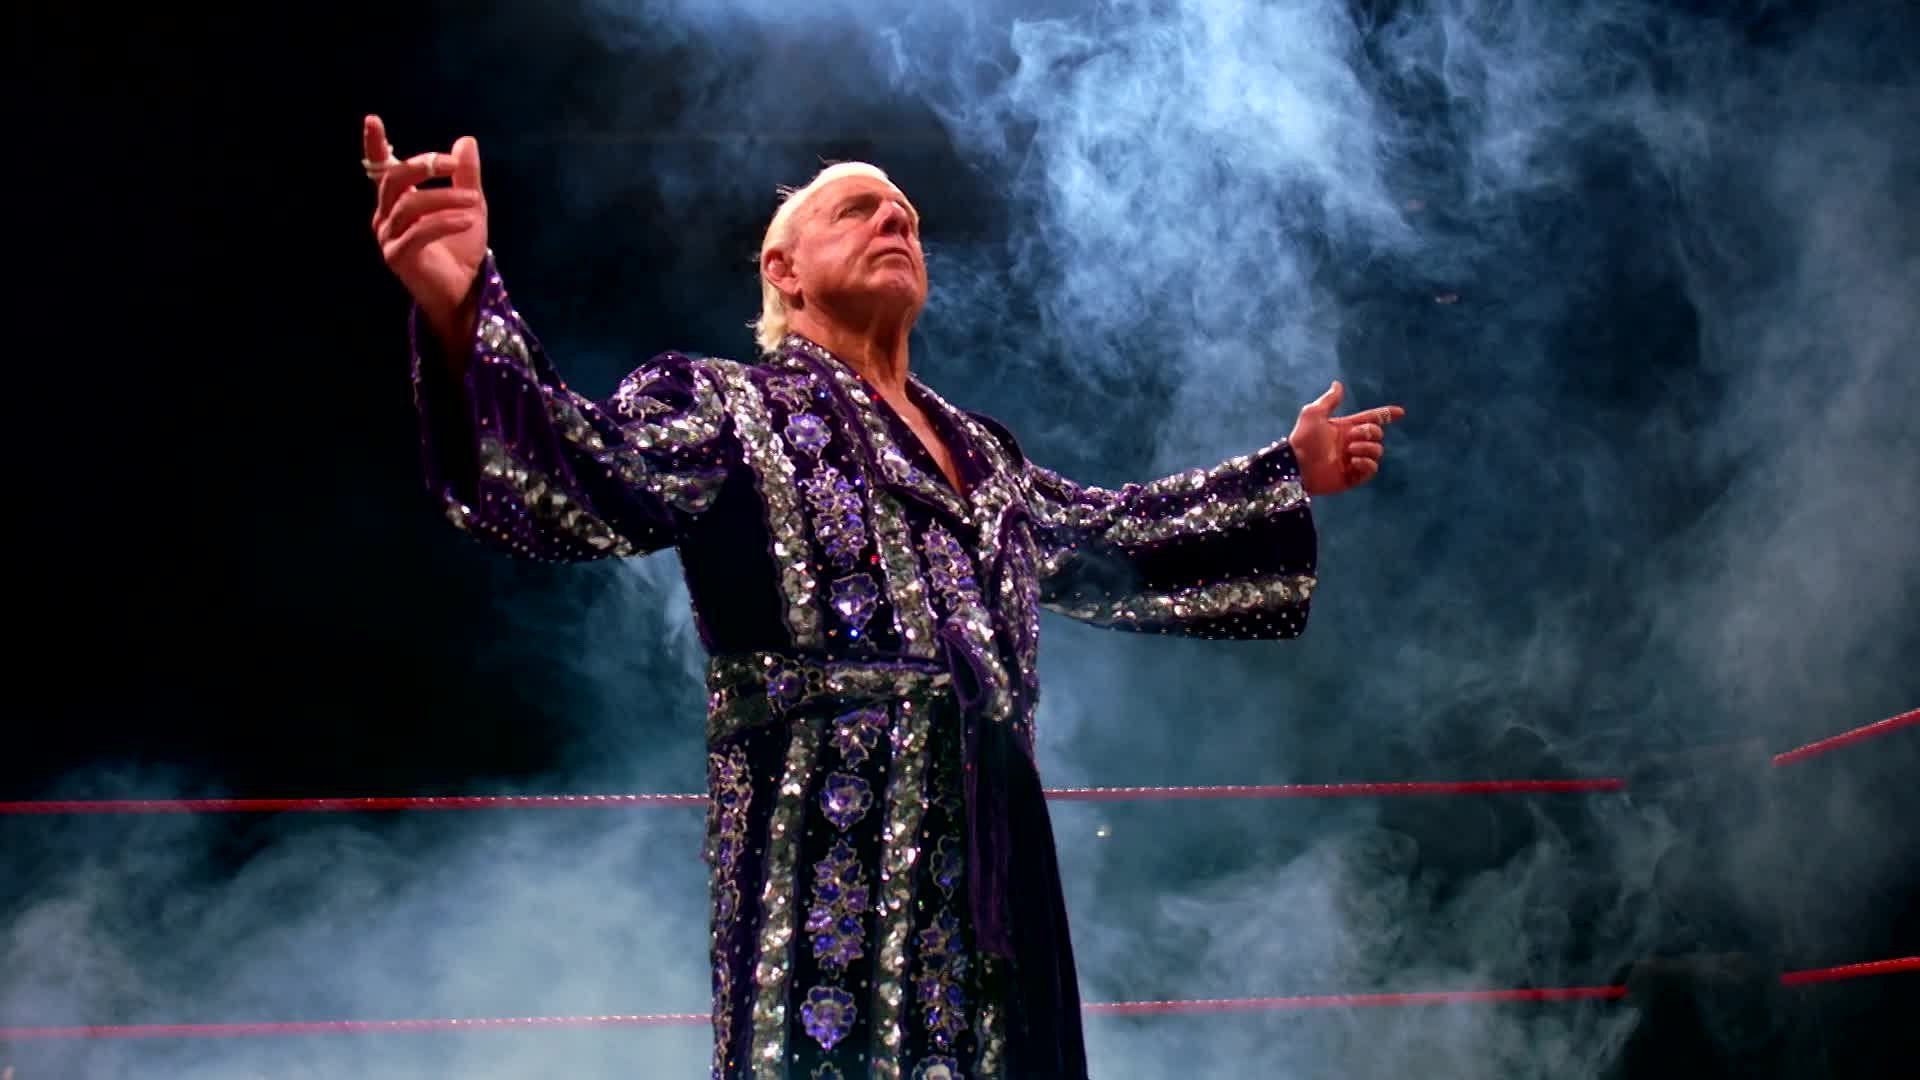 Ric Flair, the 16-Time World Champion